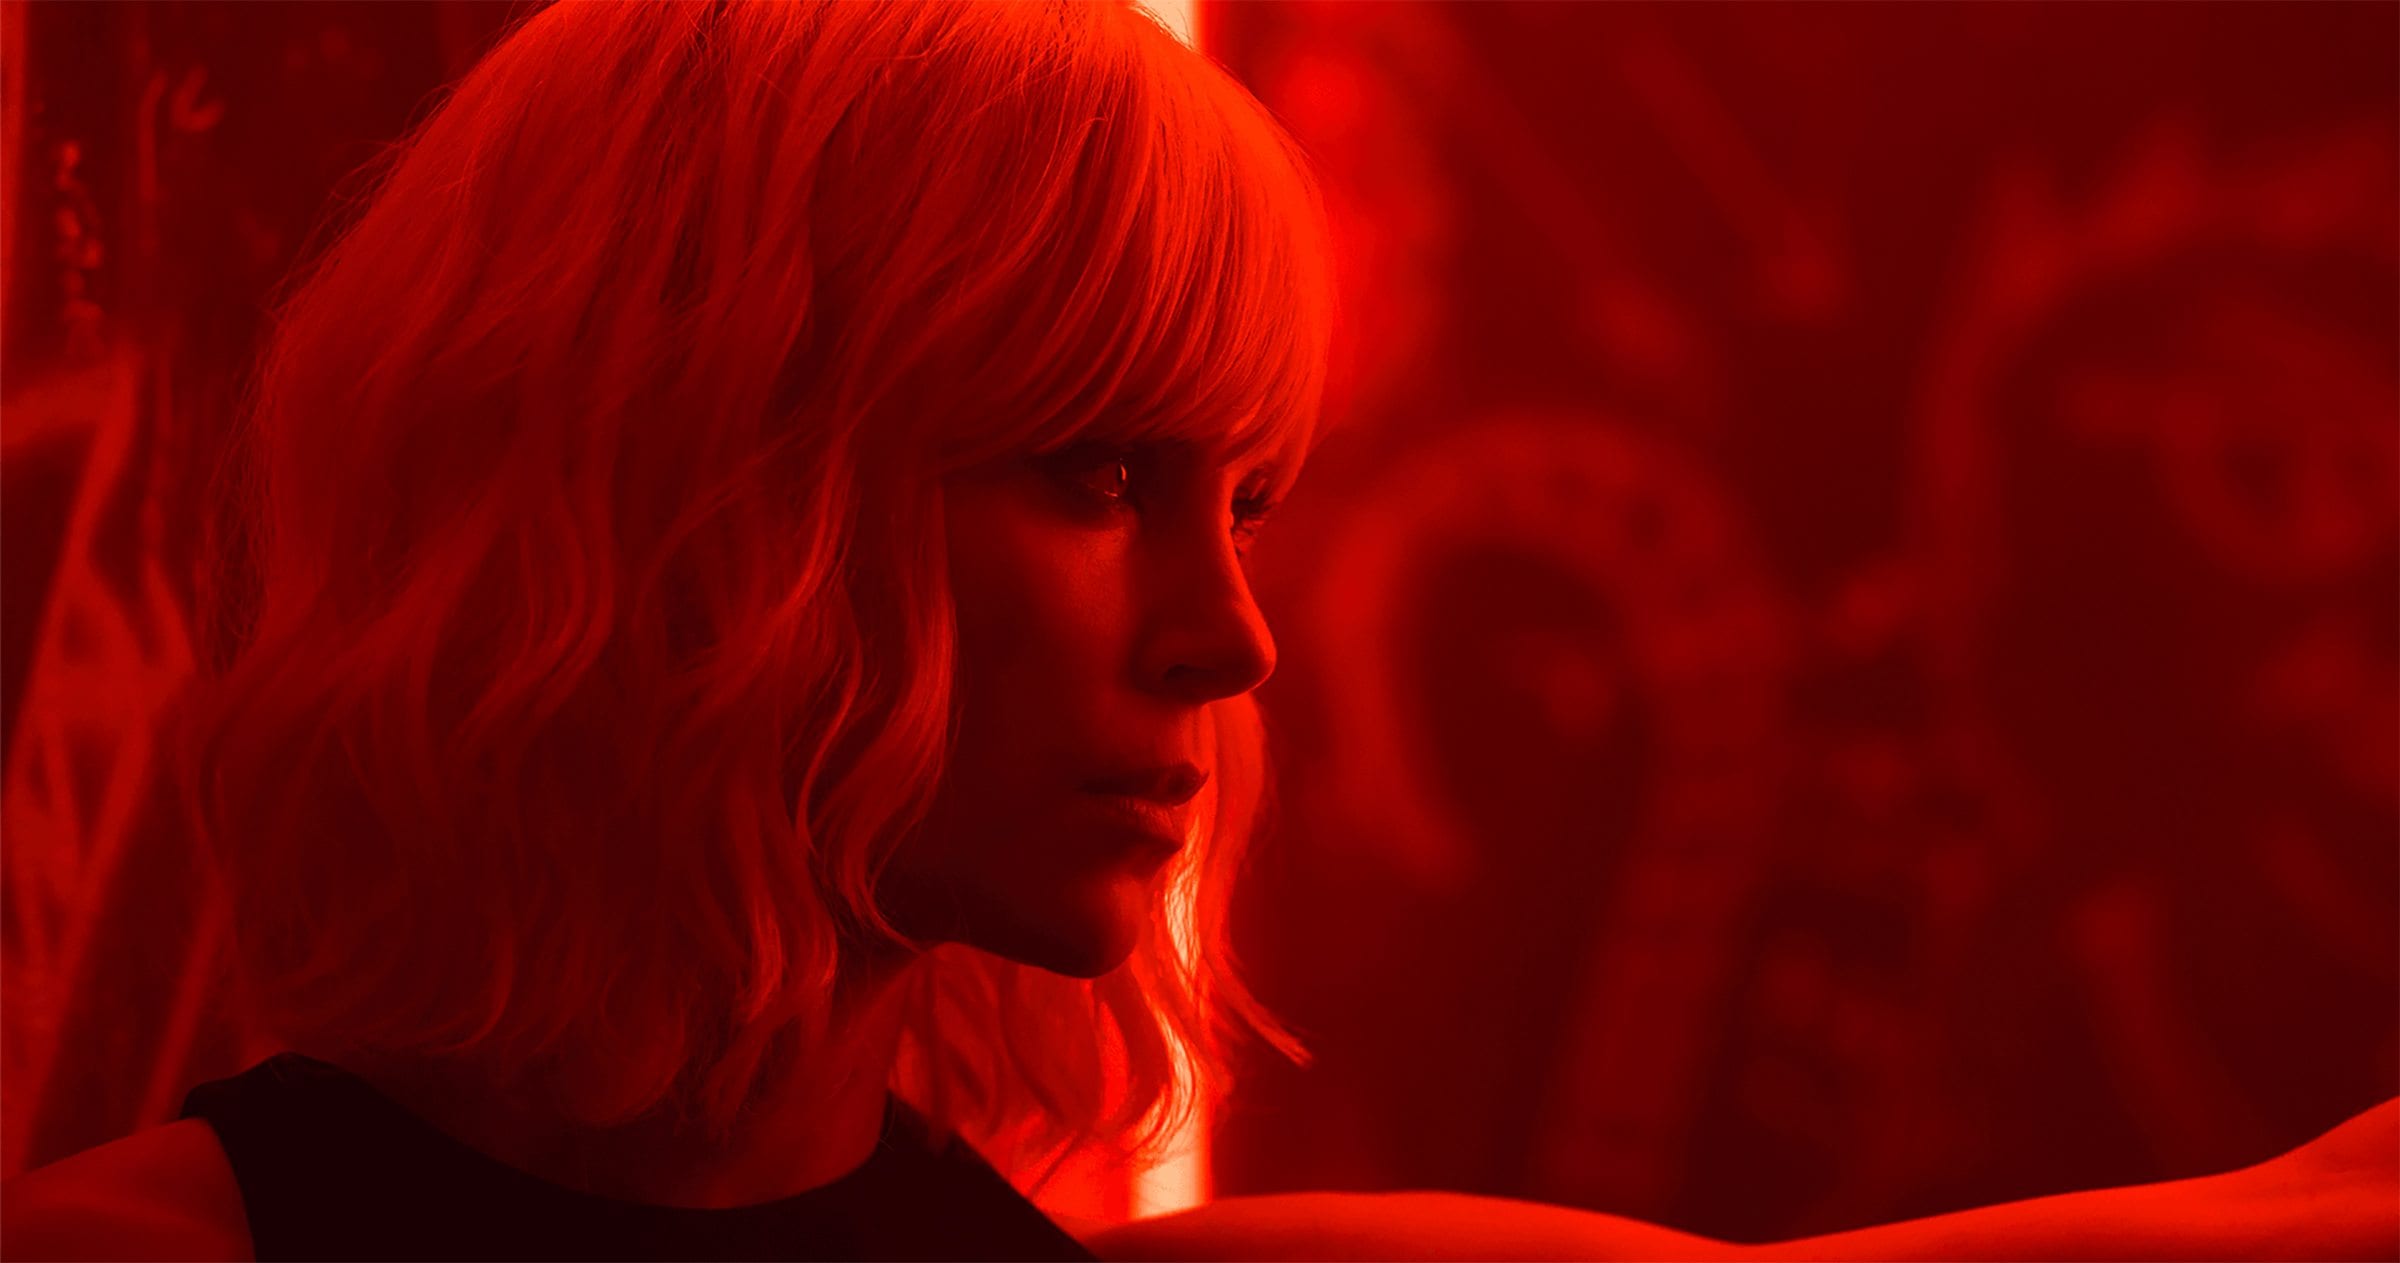 This year’s Fantasia Fest, the international film festival dedicated to genre cinema, will host a special screening for 'Atomic Blonde' and 'Good Time'.